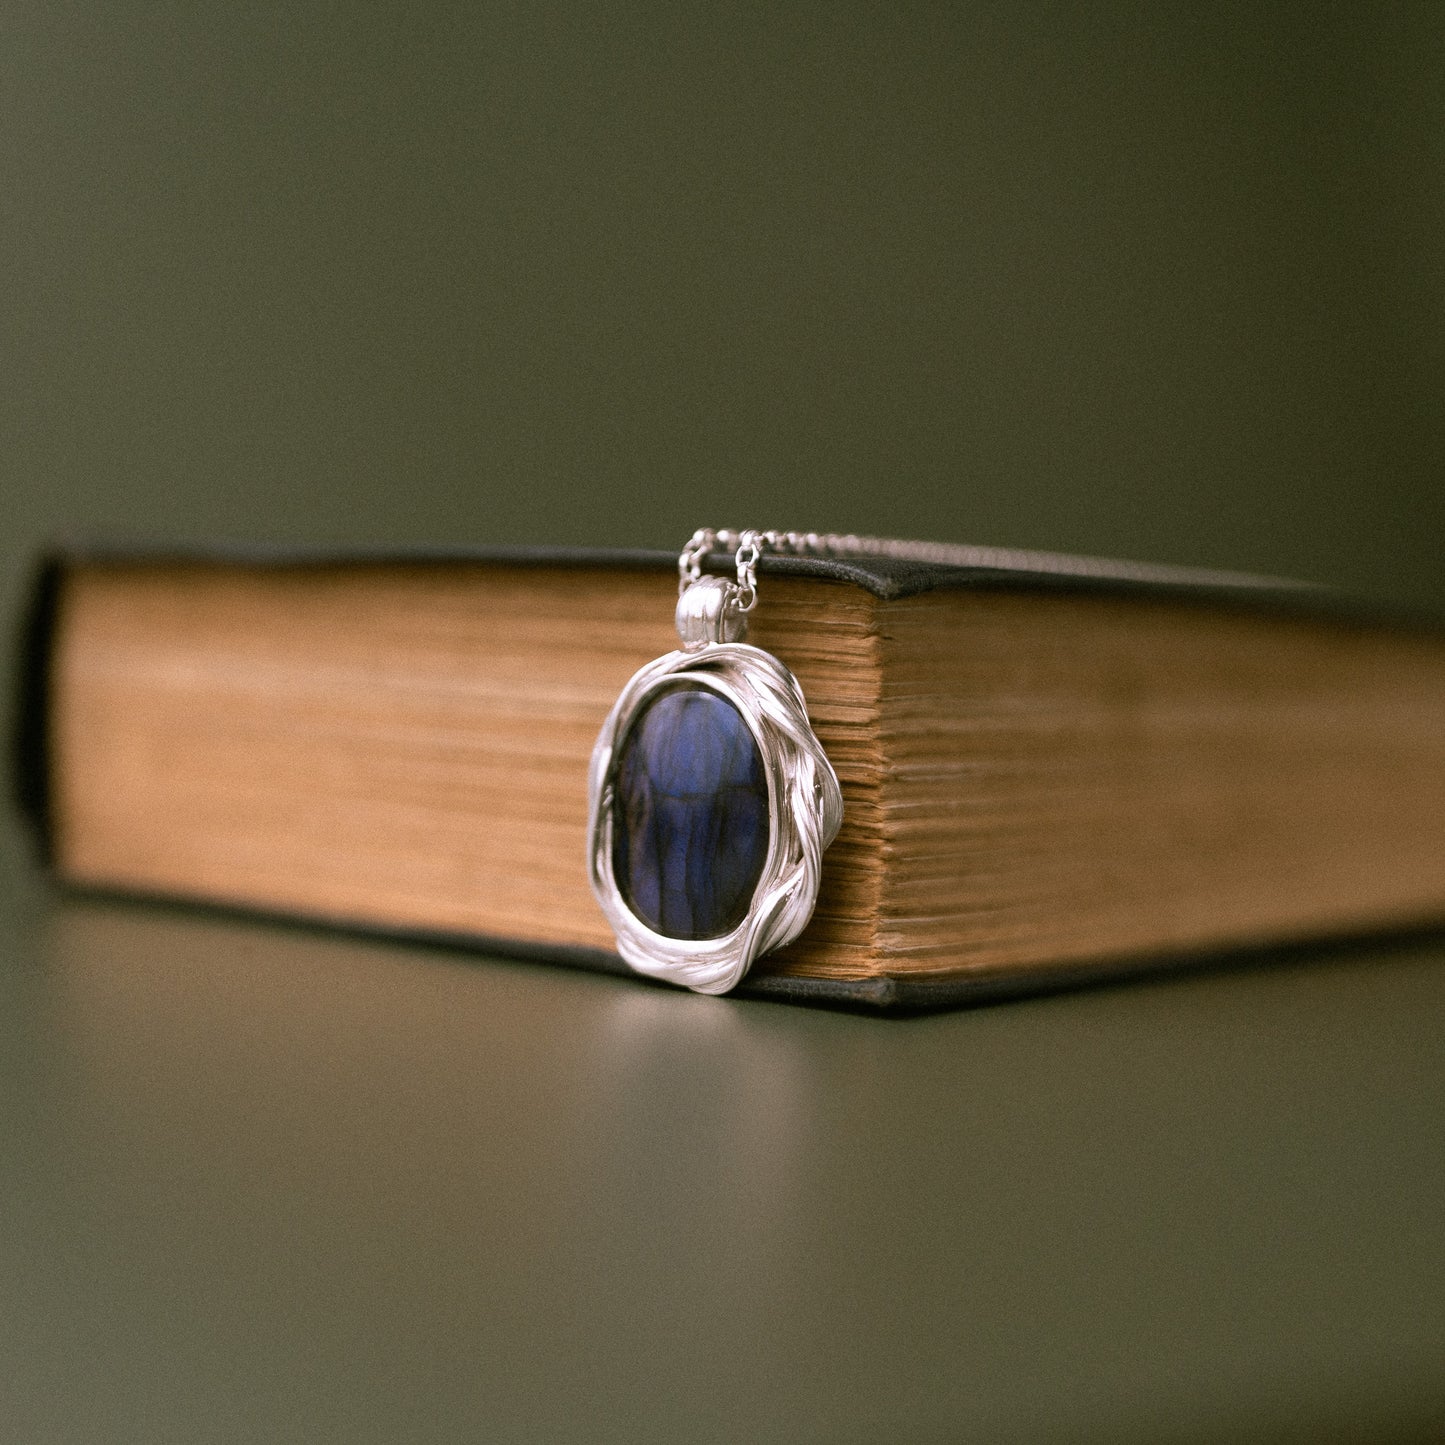 One of a Kind Small Silver Drift Necklace with Labradorite